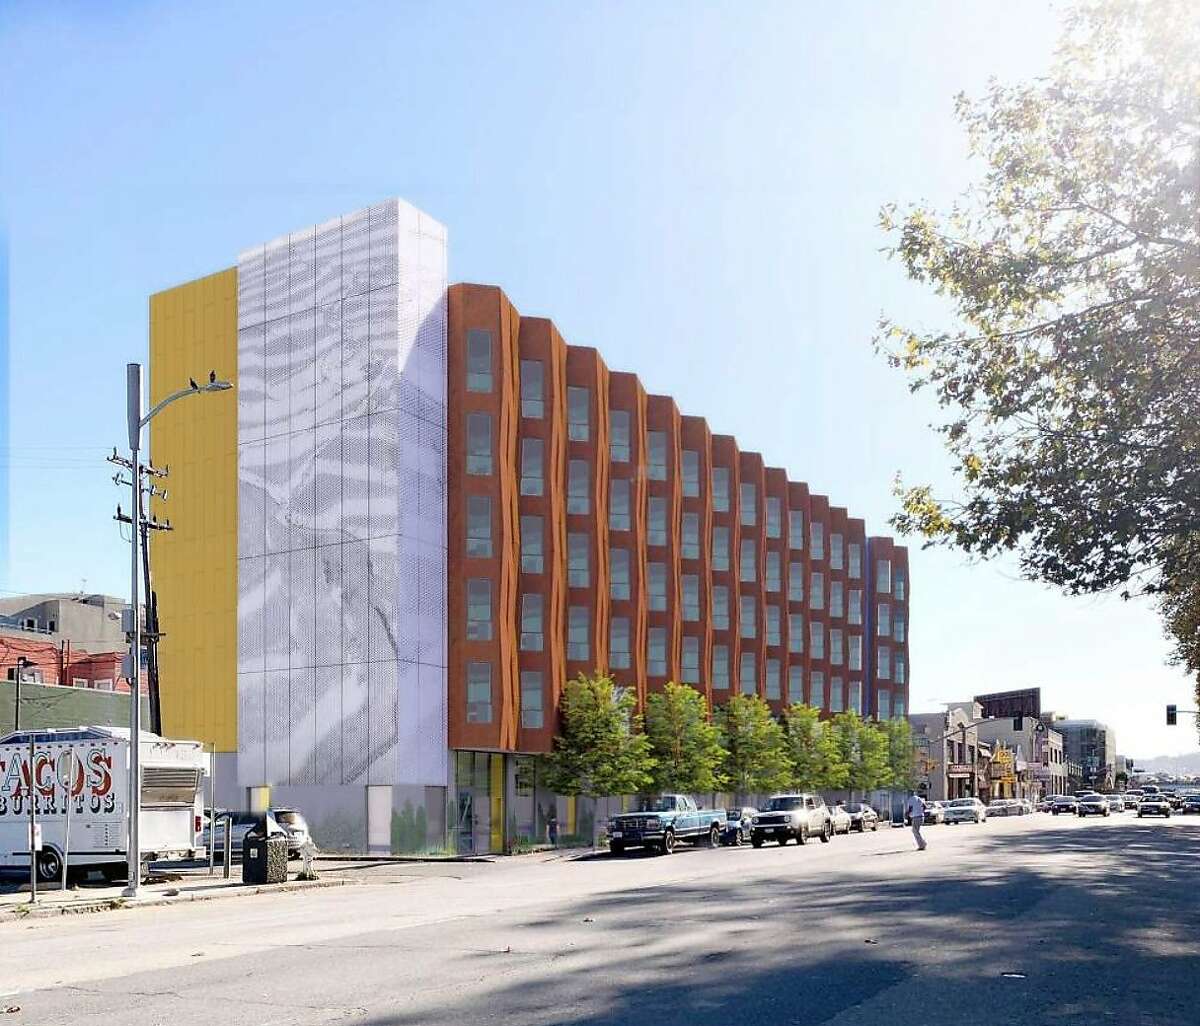 Charles and Helen Schwab have donated $65 million to a local nonprofit to build supportive housing for homeless people. One project will be a 145-unit apartment complex at 833 Bryant St. across from the Hall of Justice in San Francisco. This is a rendering of the building.